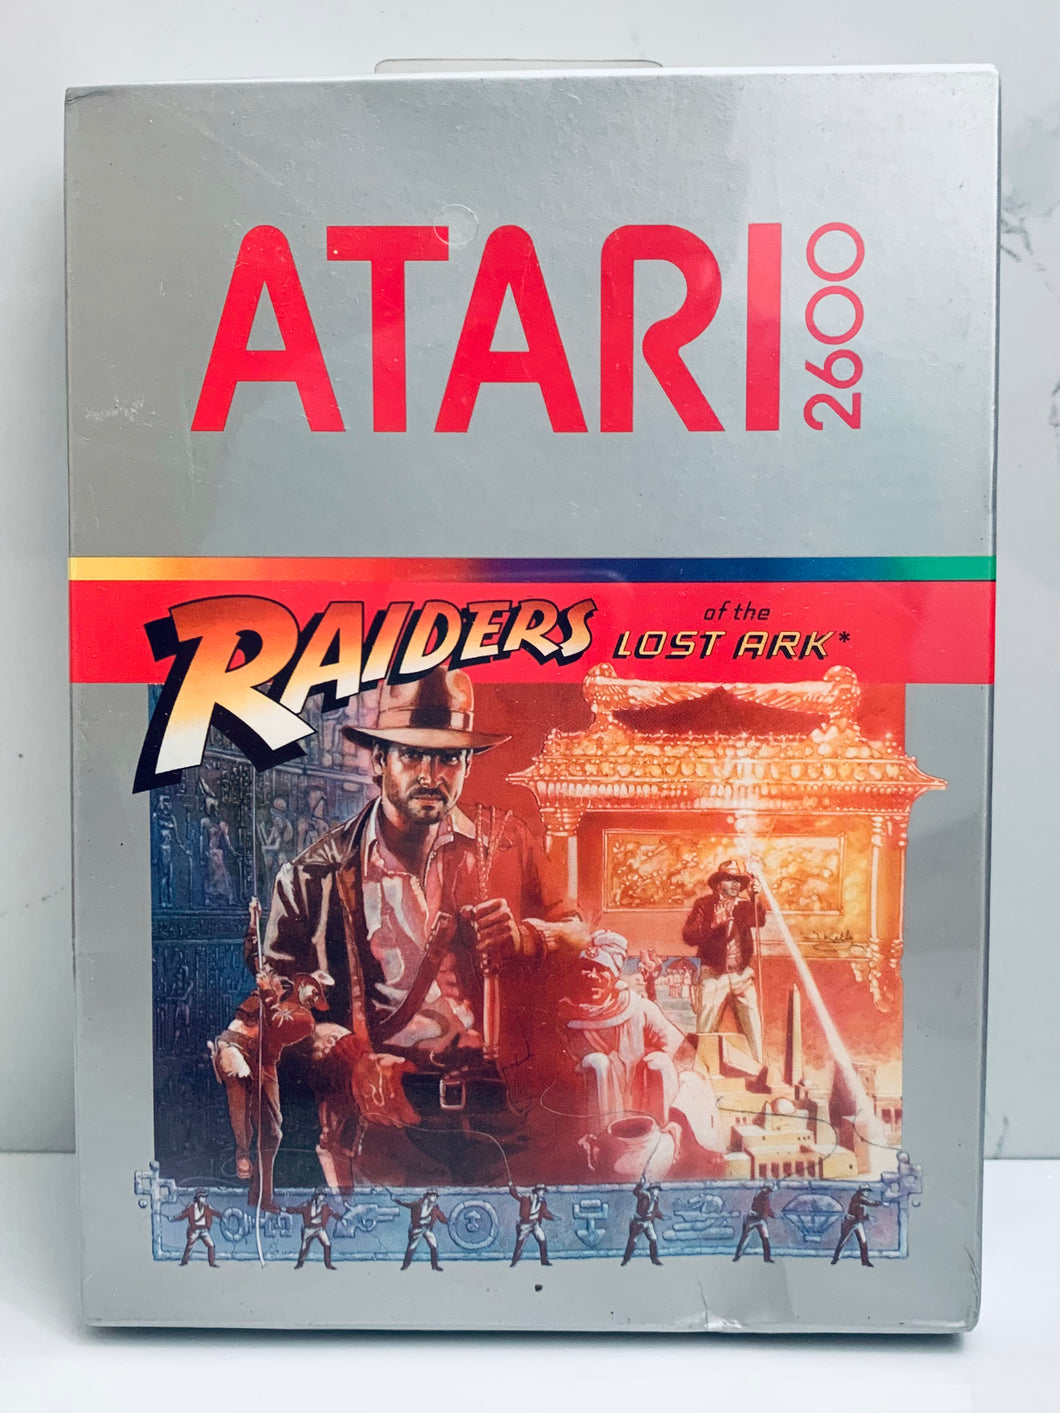 Riders of the Lost Ark - Atari VCS 2600 - NTSC - Brand New & Factory Sealed (Extremely Rare)